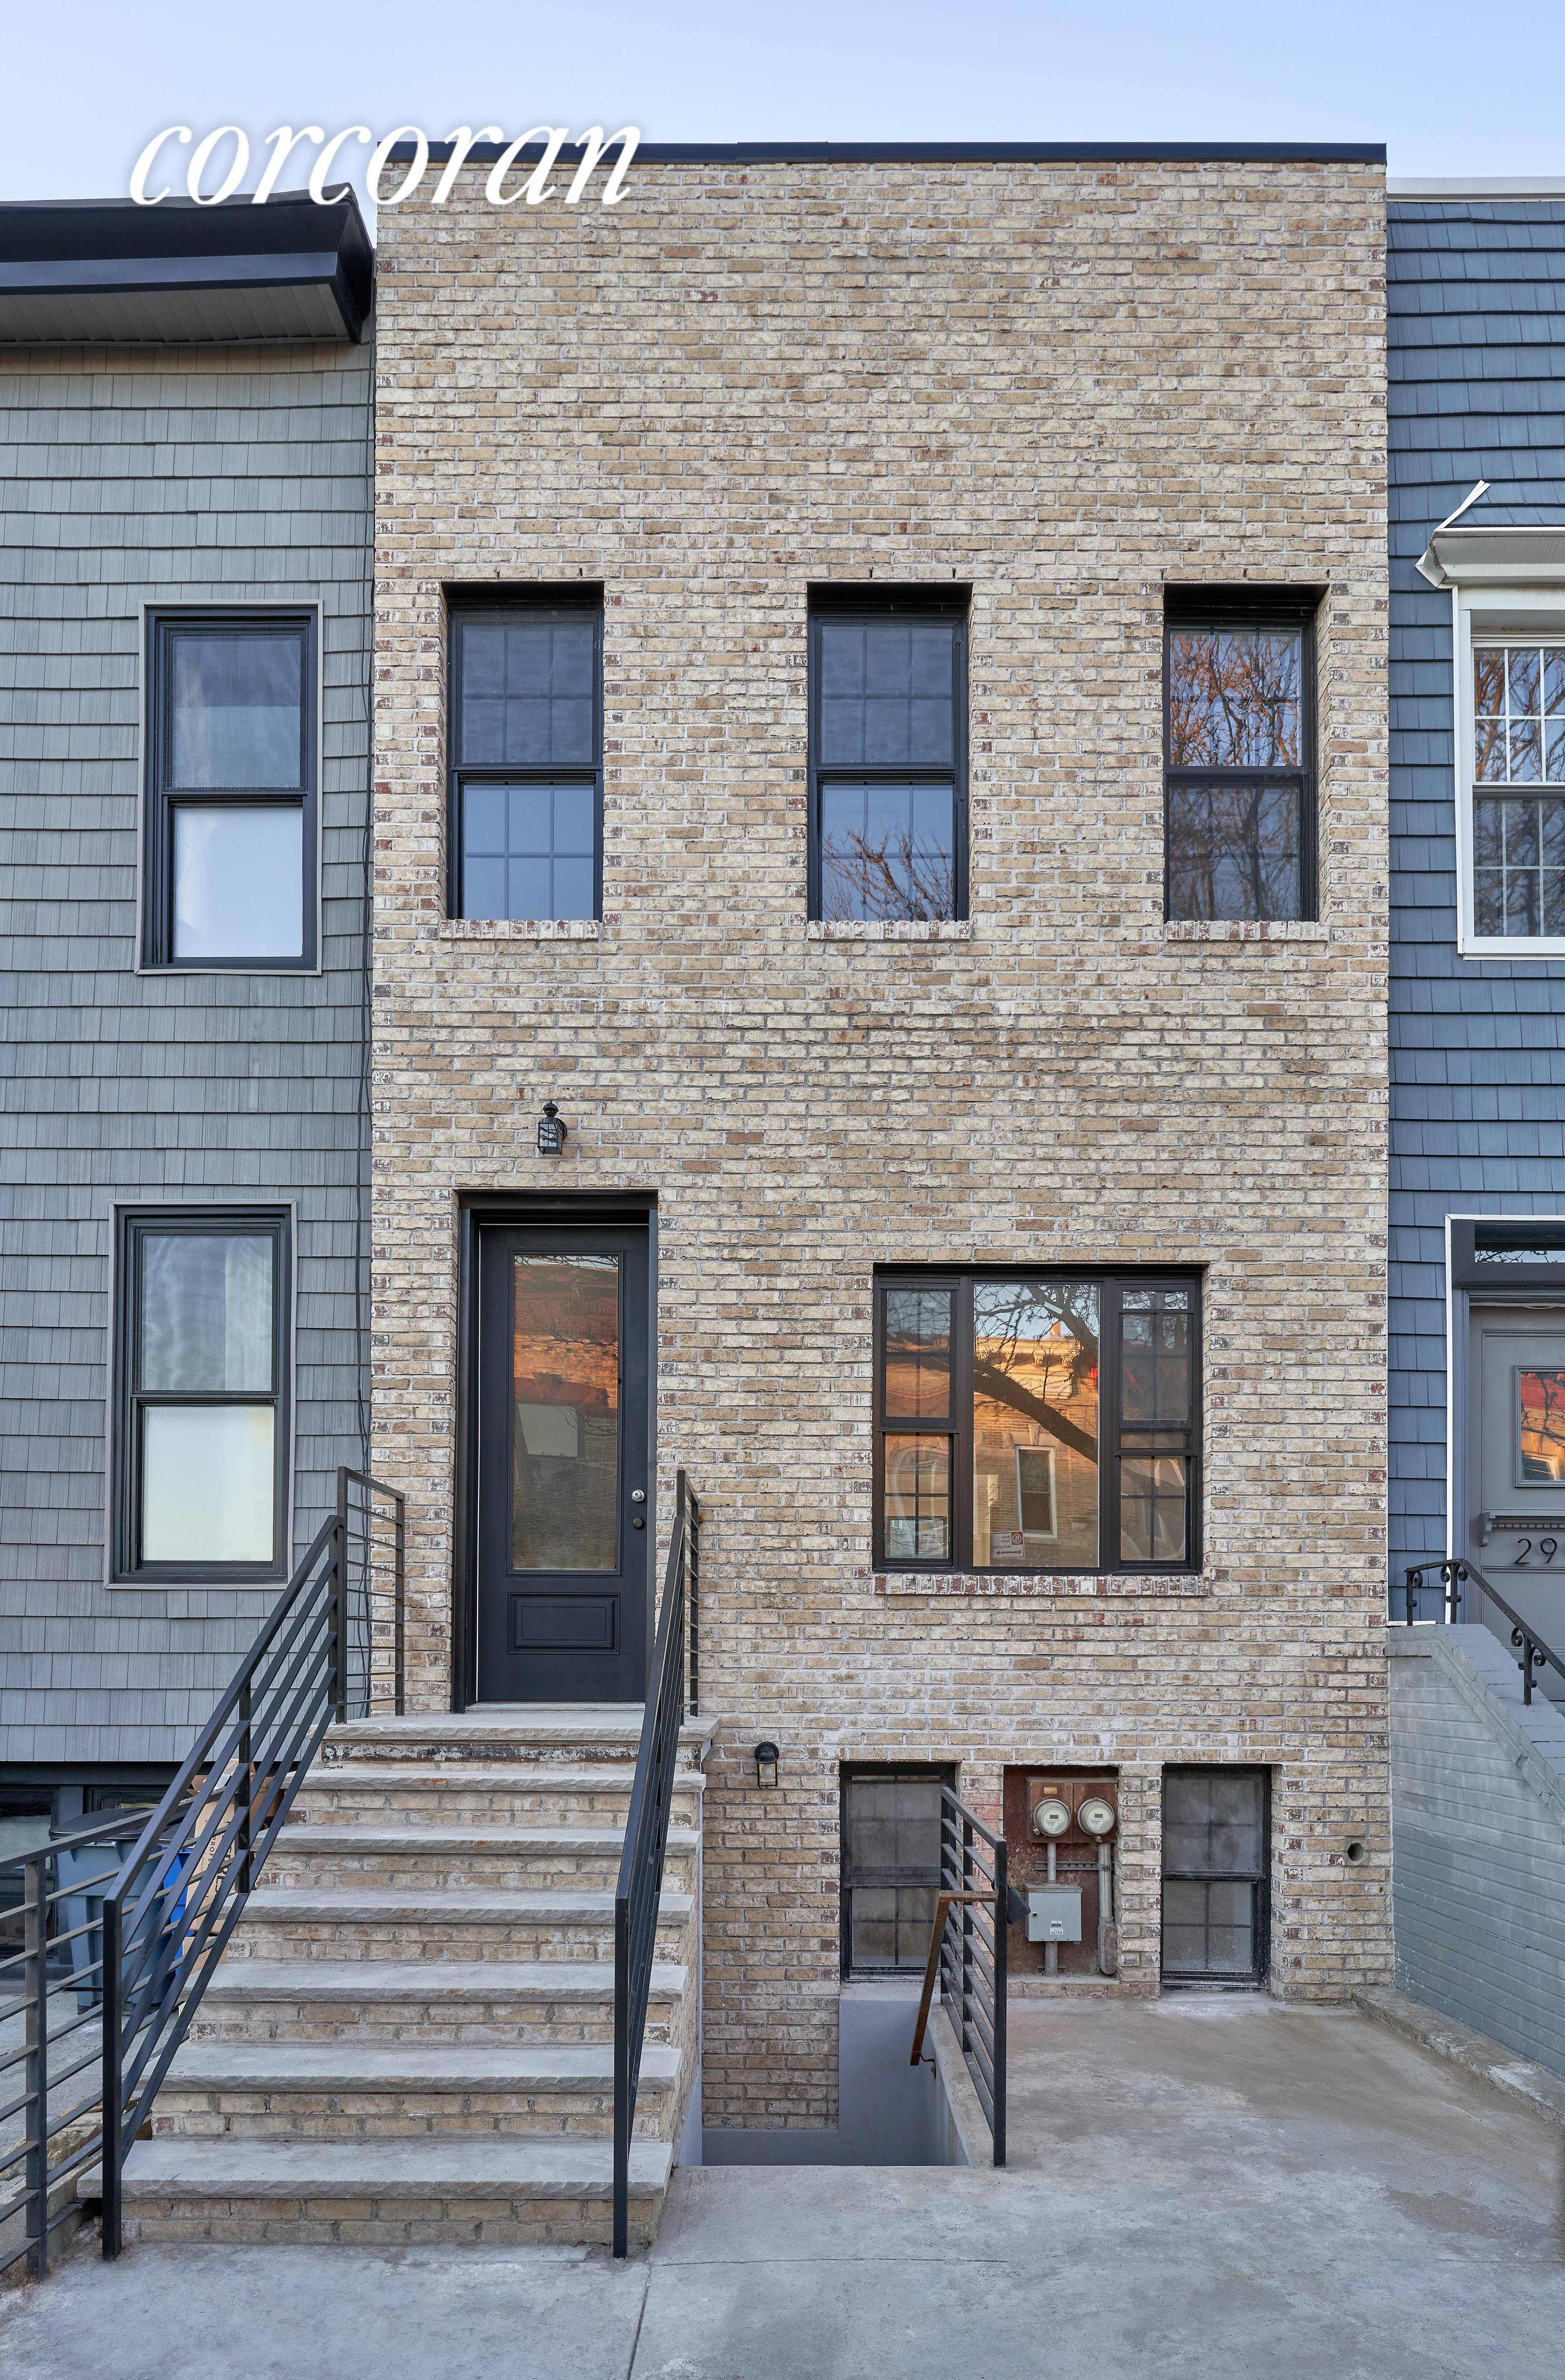 New to the Market 297 A Cooper Street in Bushwick, Brooklyn Designed for your lifestyle, this lovely townhouse has a three bedroom owners duplex with two full bathrooms and one ...